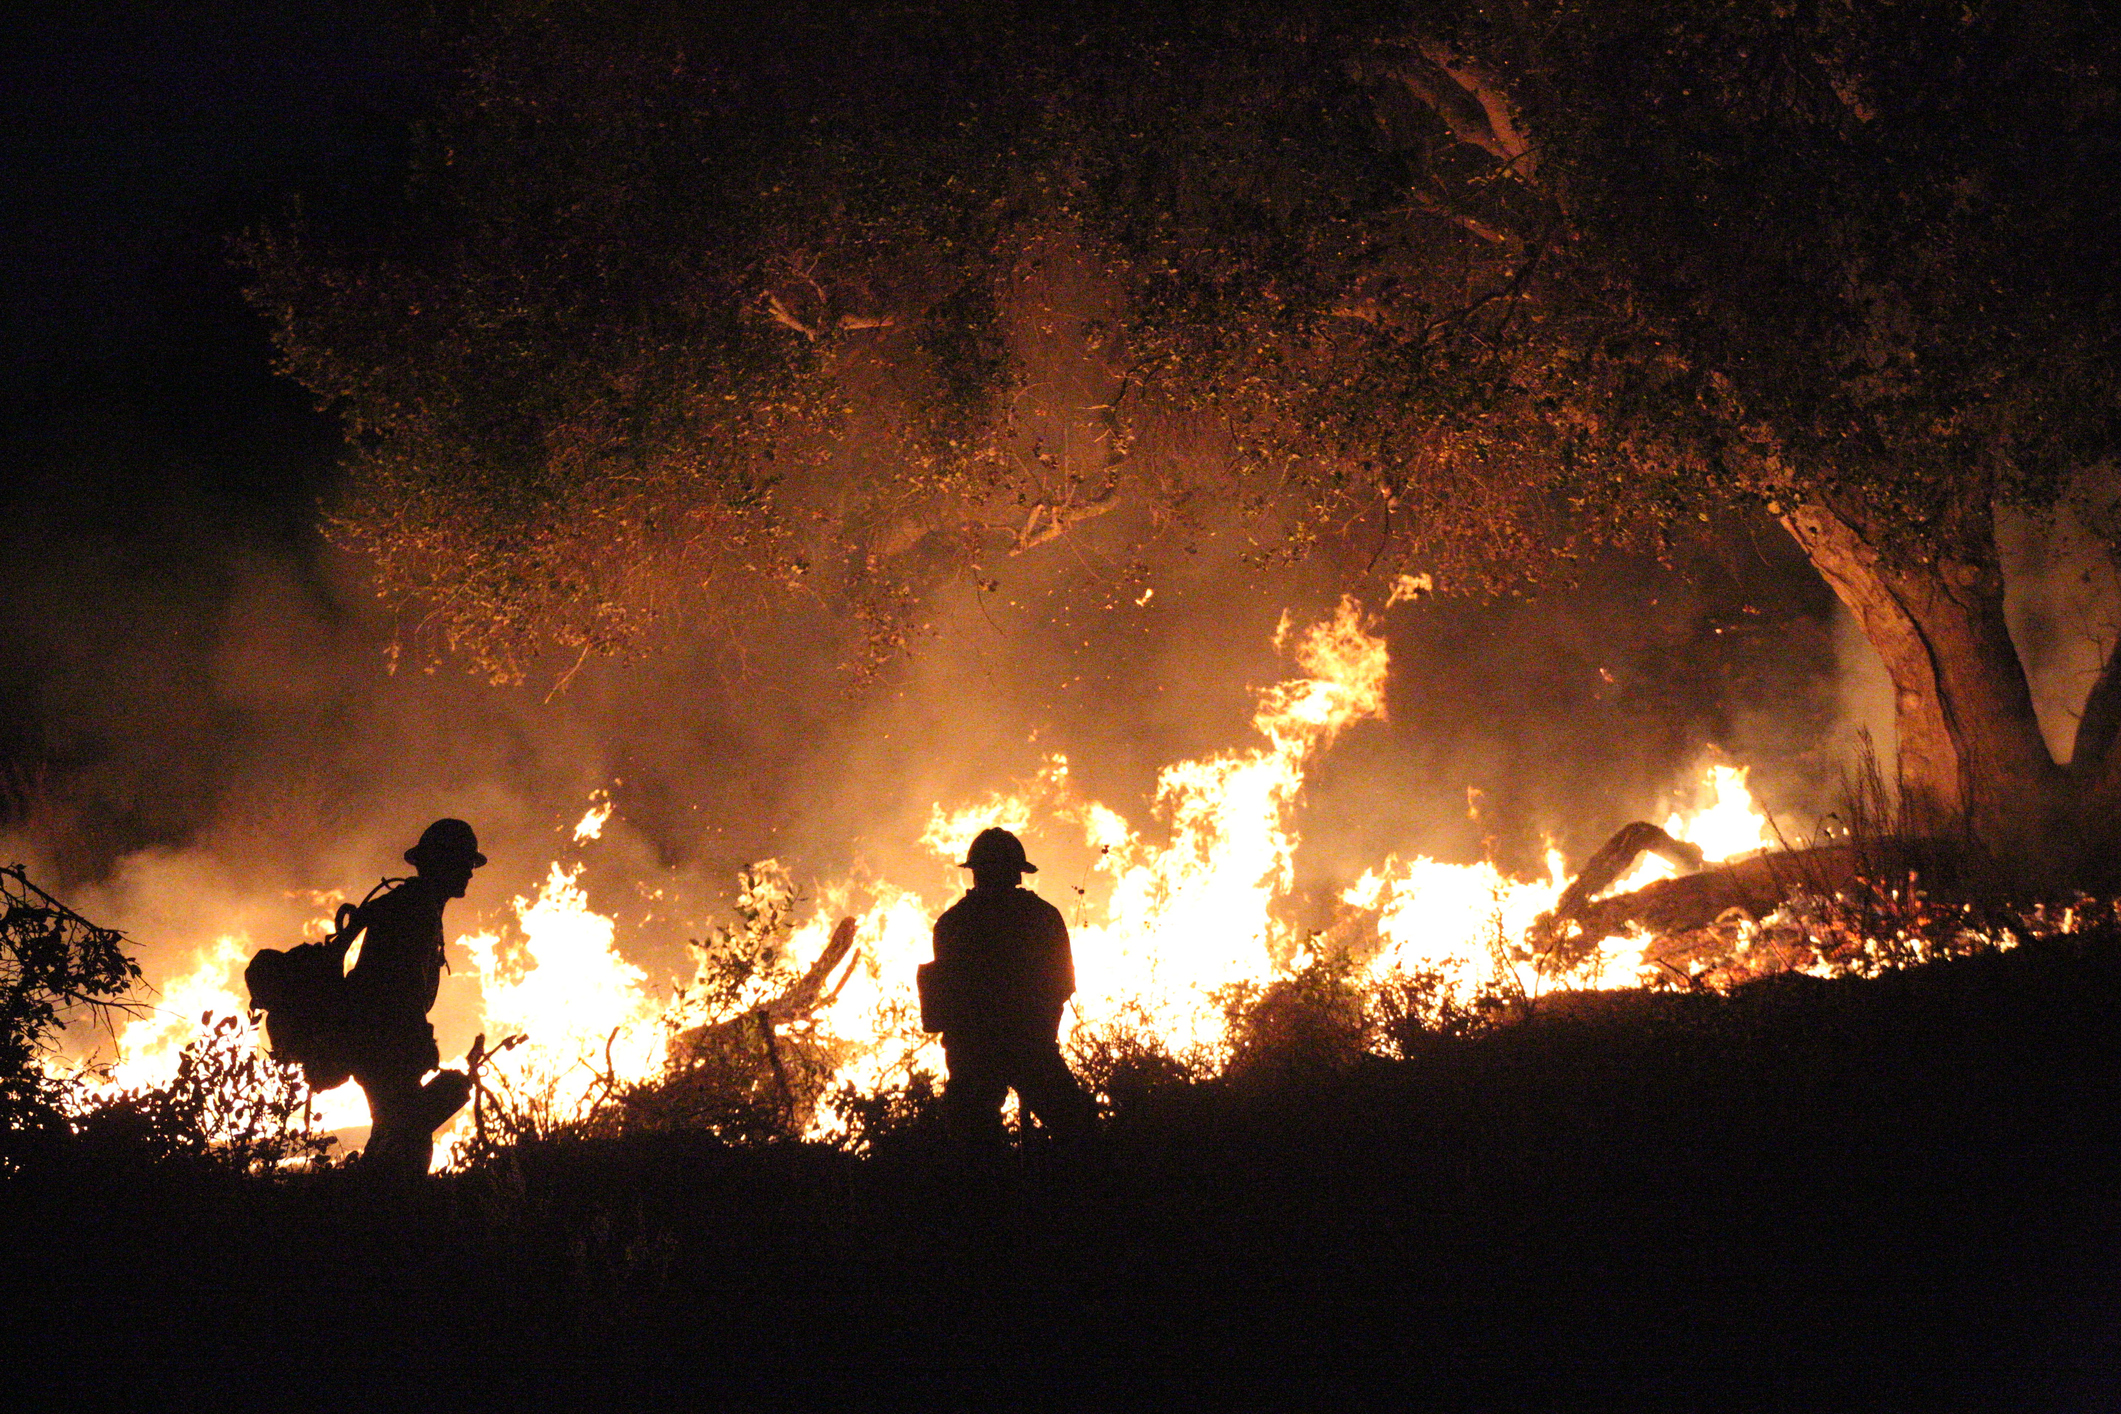 Two firefighters fight a wildfire in California at night.